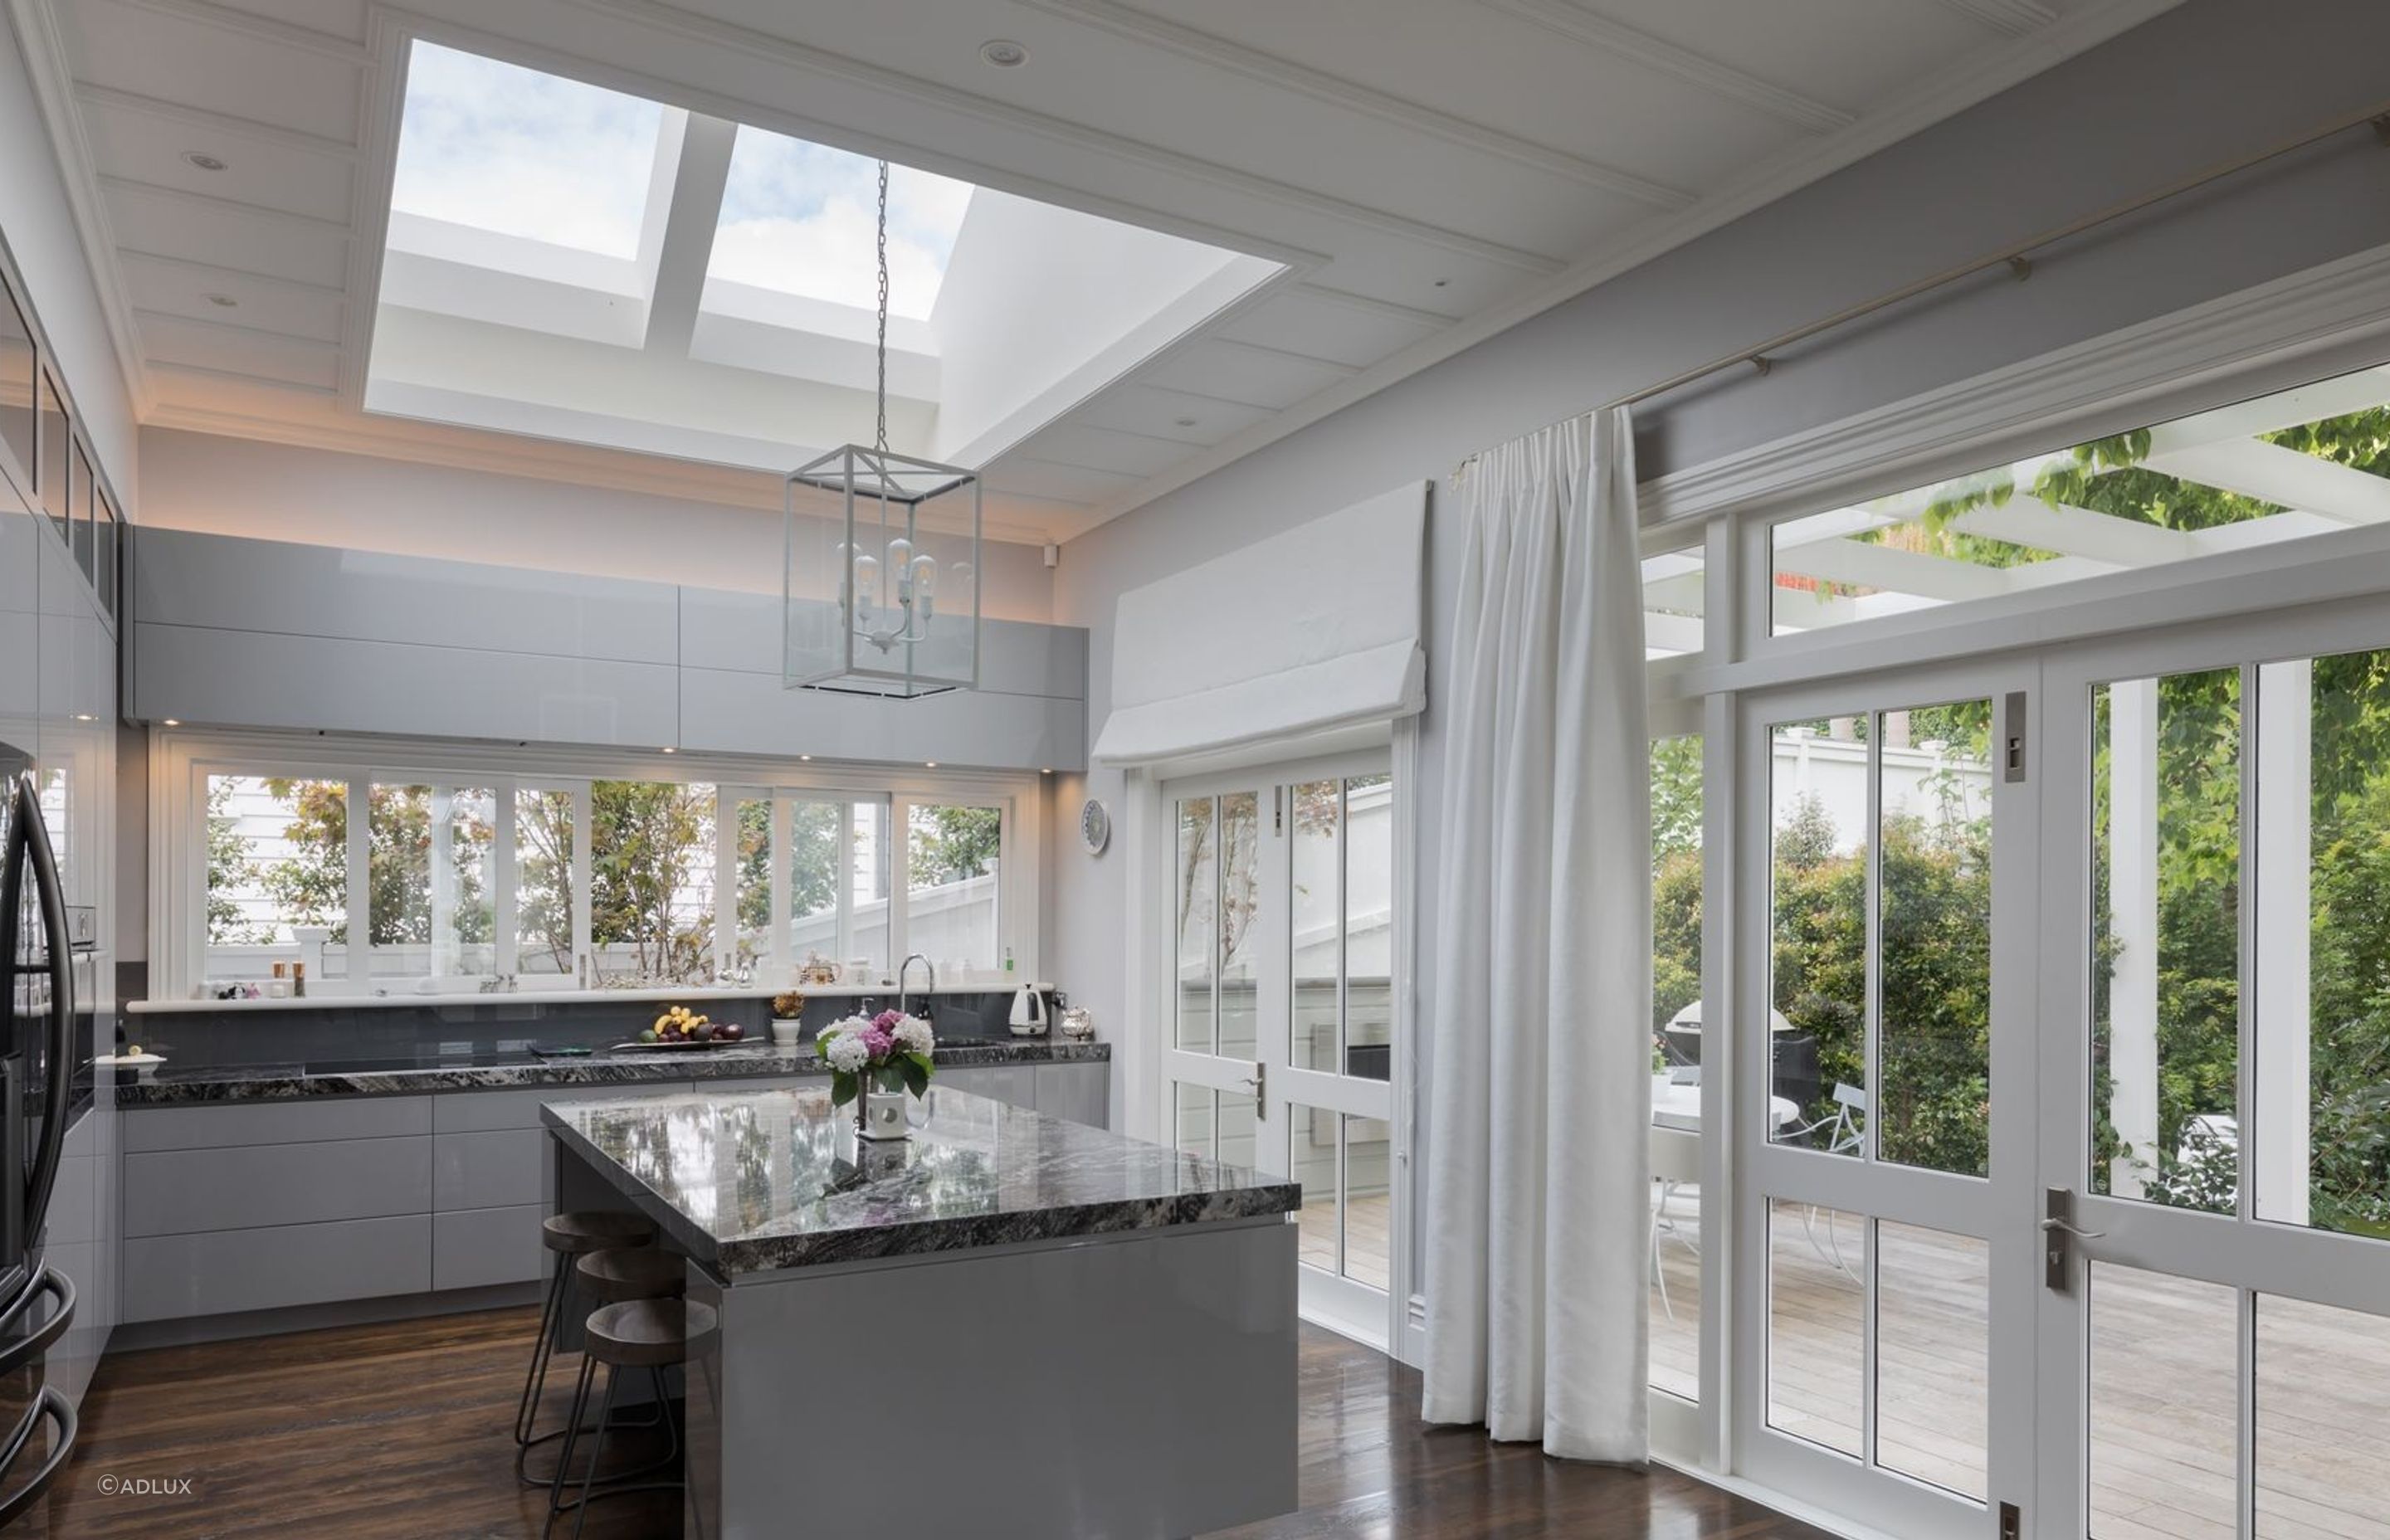 Skylights, such as this model from Adlux, can be very effective at increasing the ambient natural light.